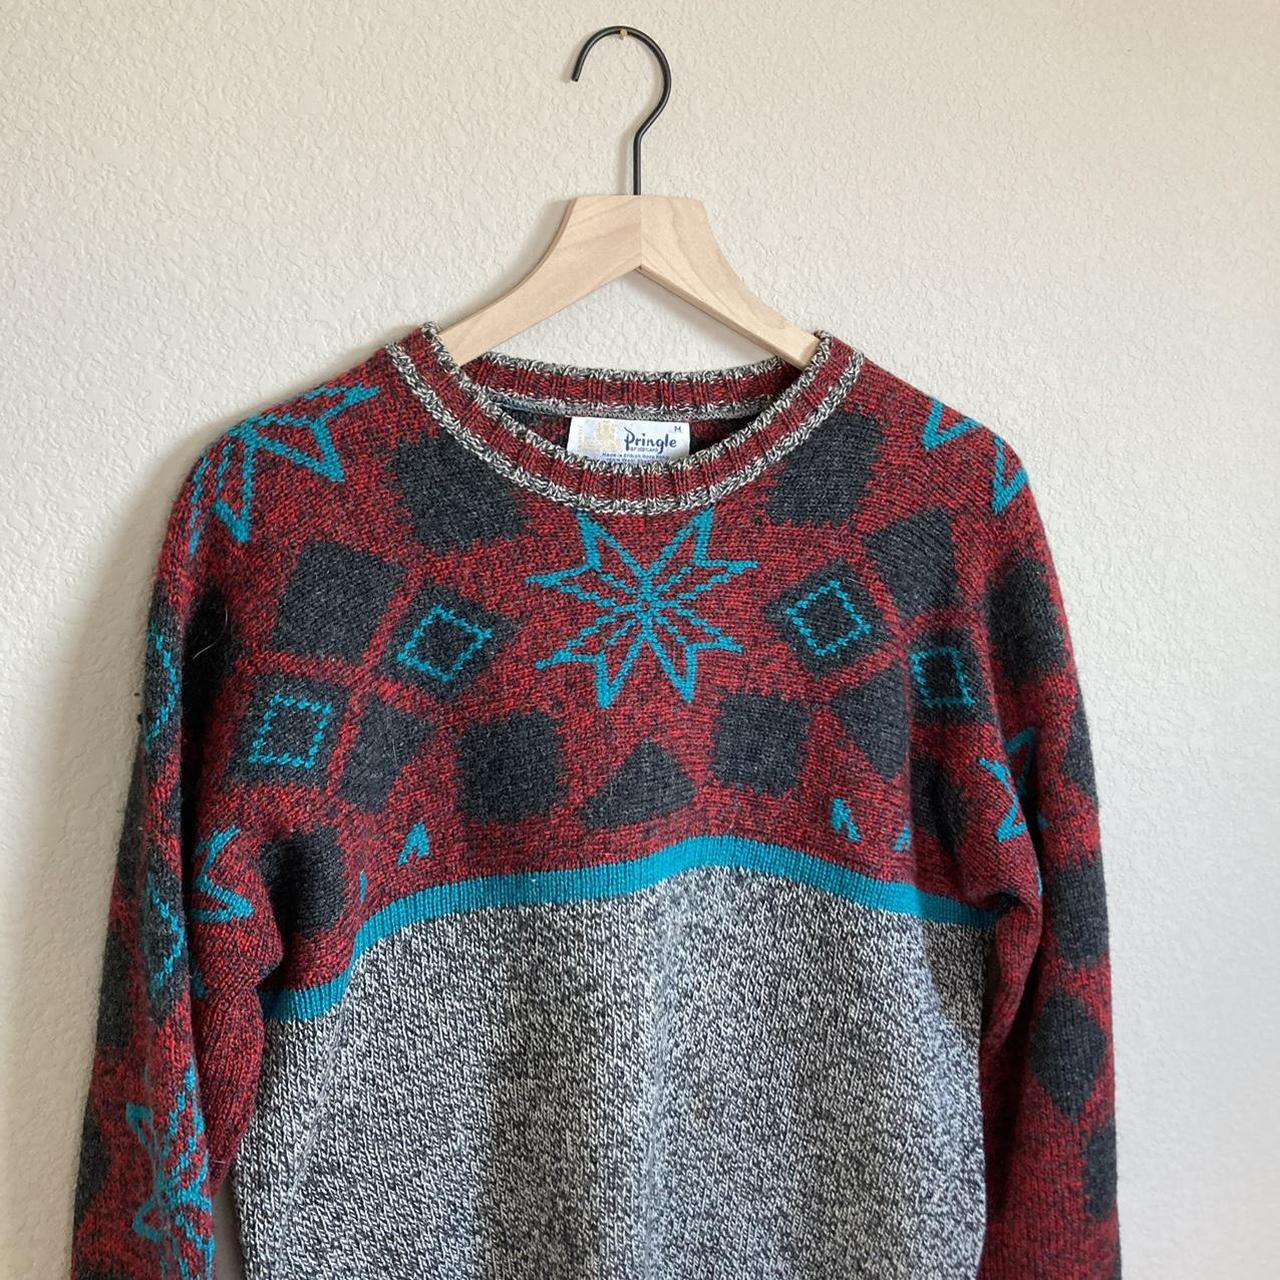 Product Image 2 - Cute lightweight sweater perfect for